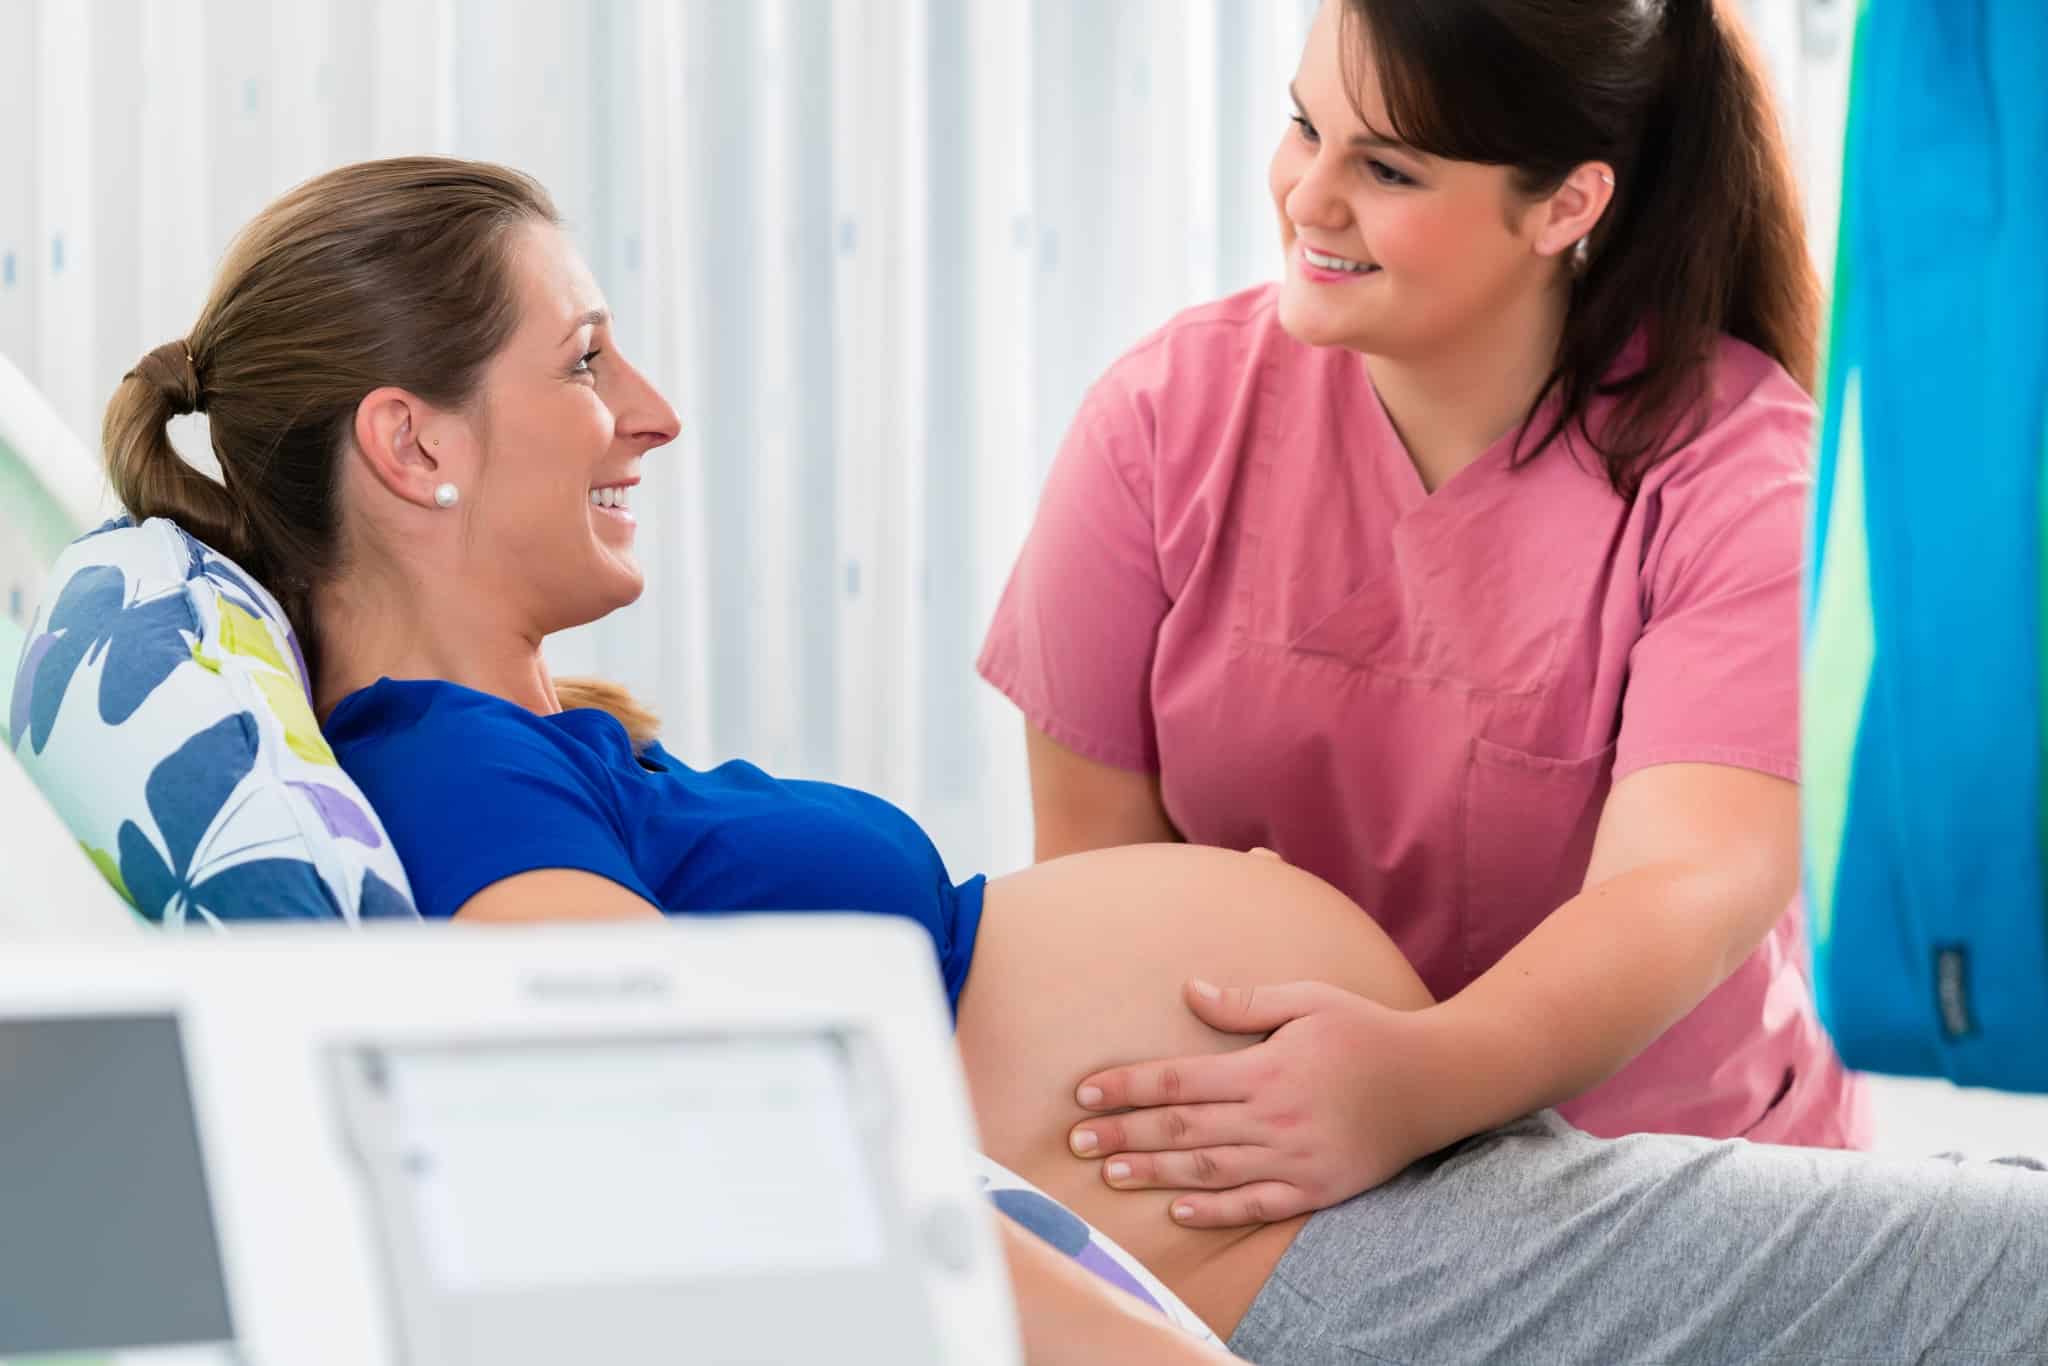 Midwife examining a patient in labor